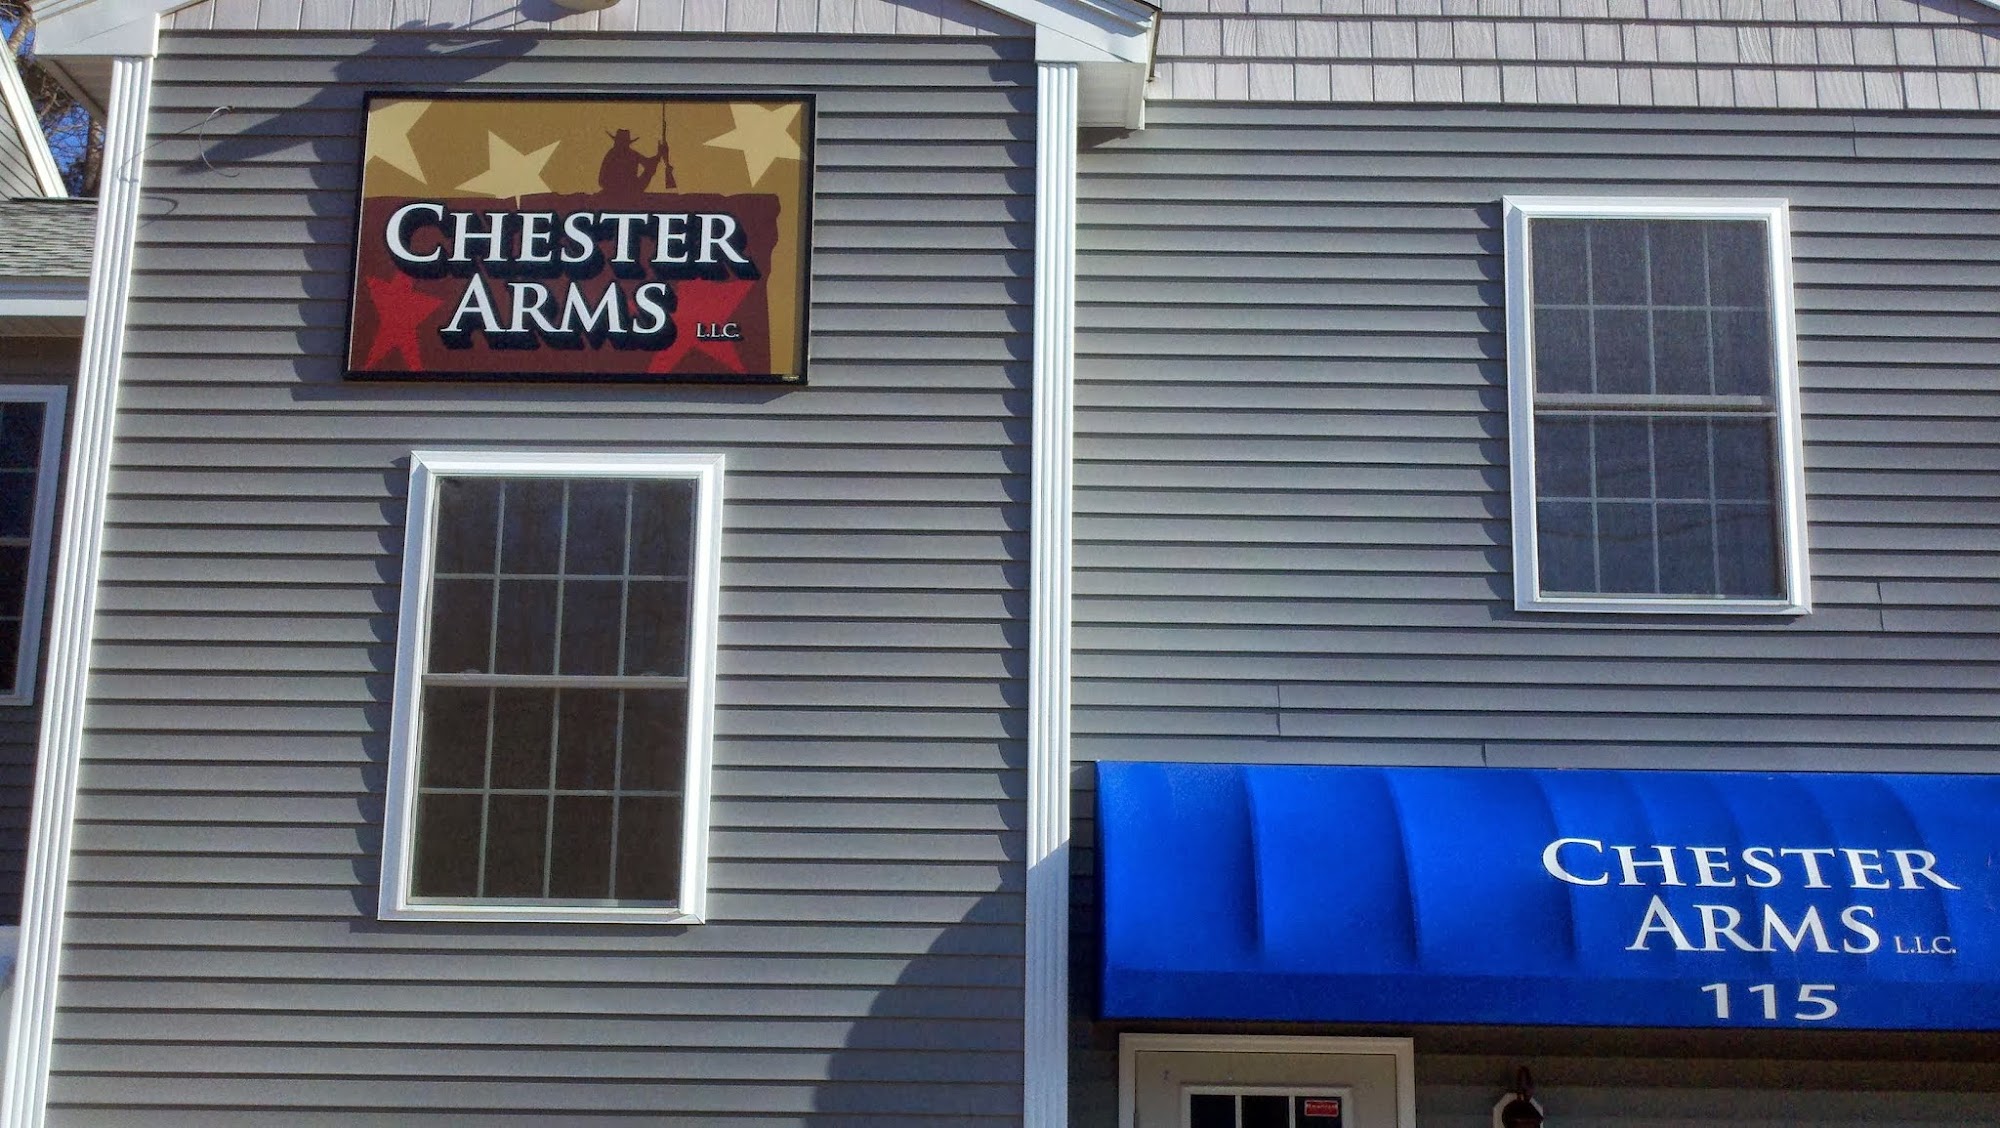 Chester Arms LLC